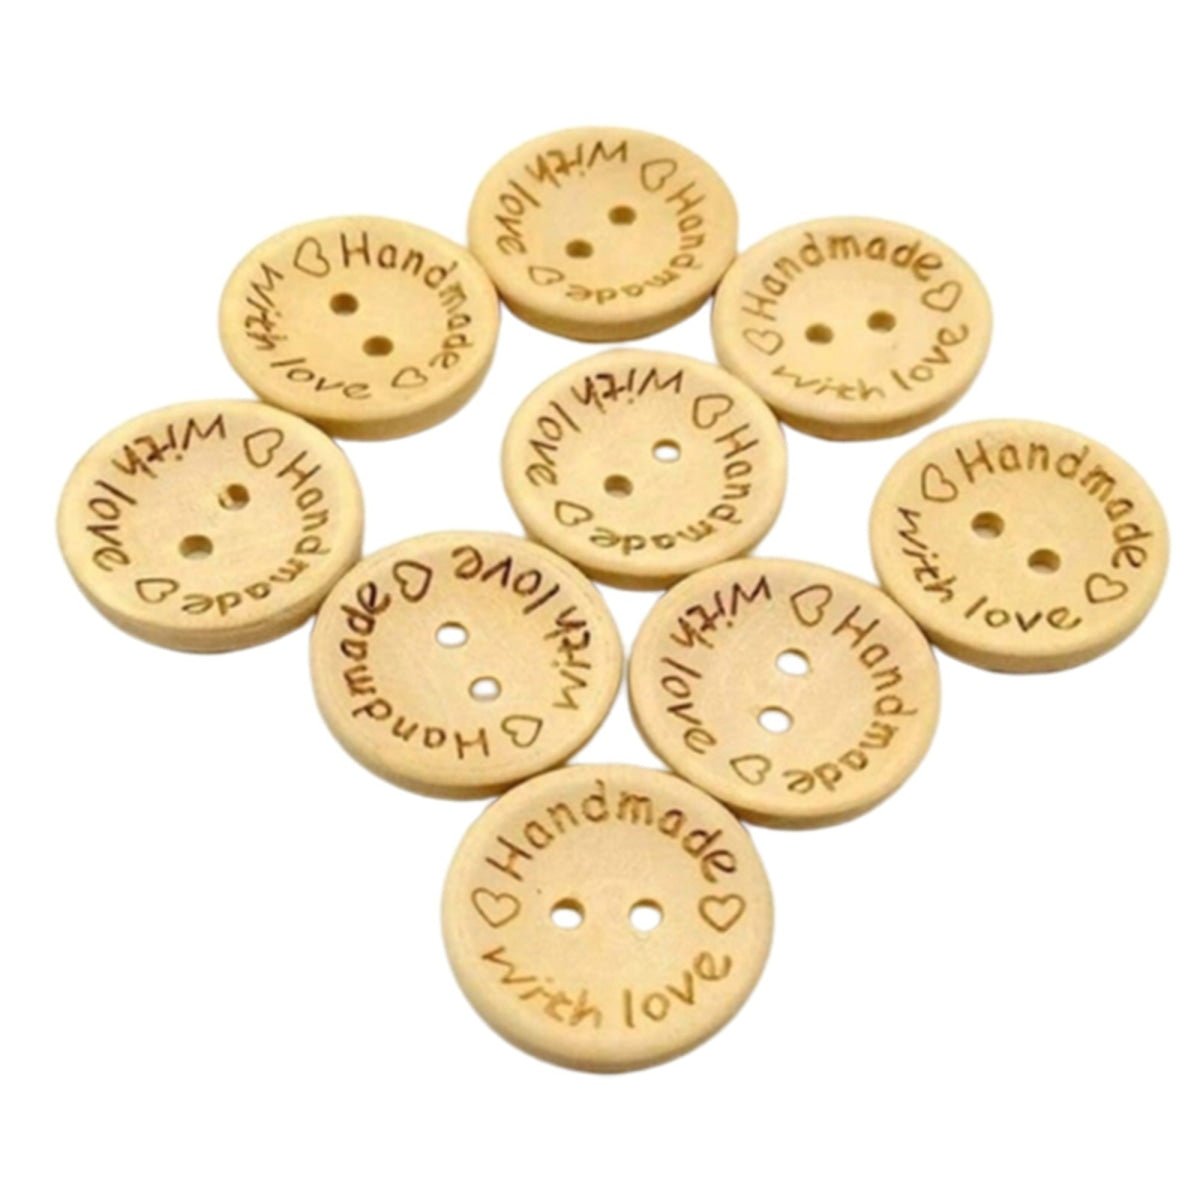 100pcs 2-Holes Handmade with Love Round Wooden Buttons Button Handmade Clothes - 25mm "Handmade with Love" - - Asia Sell